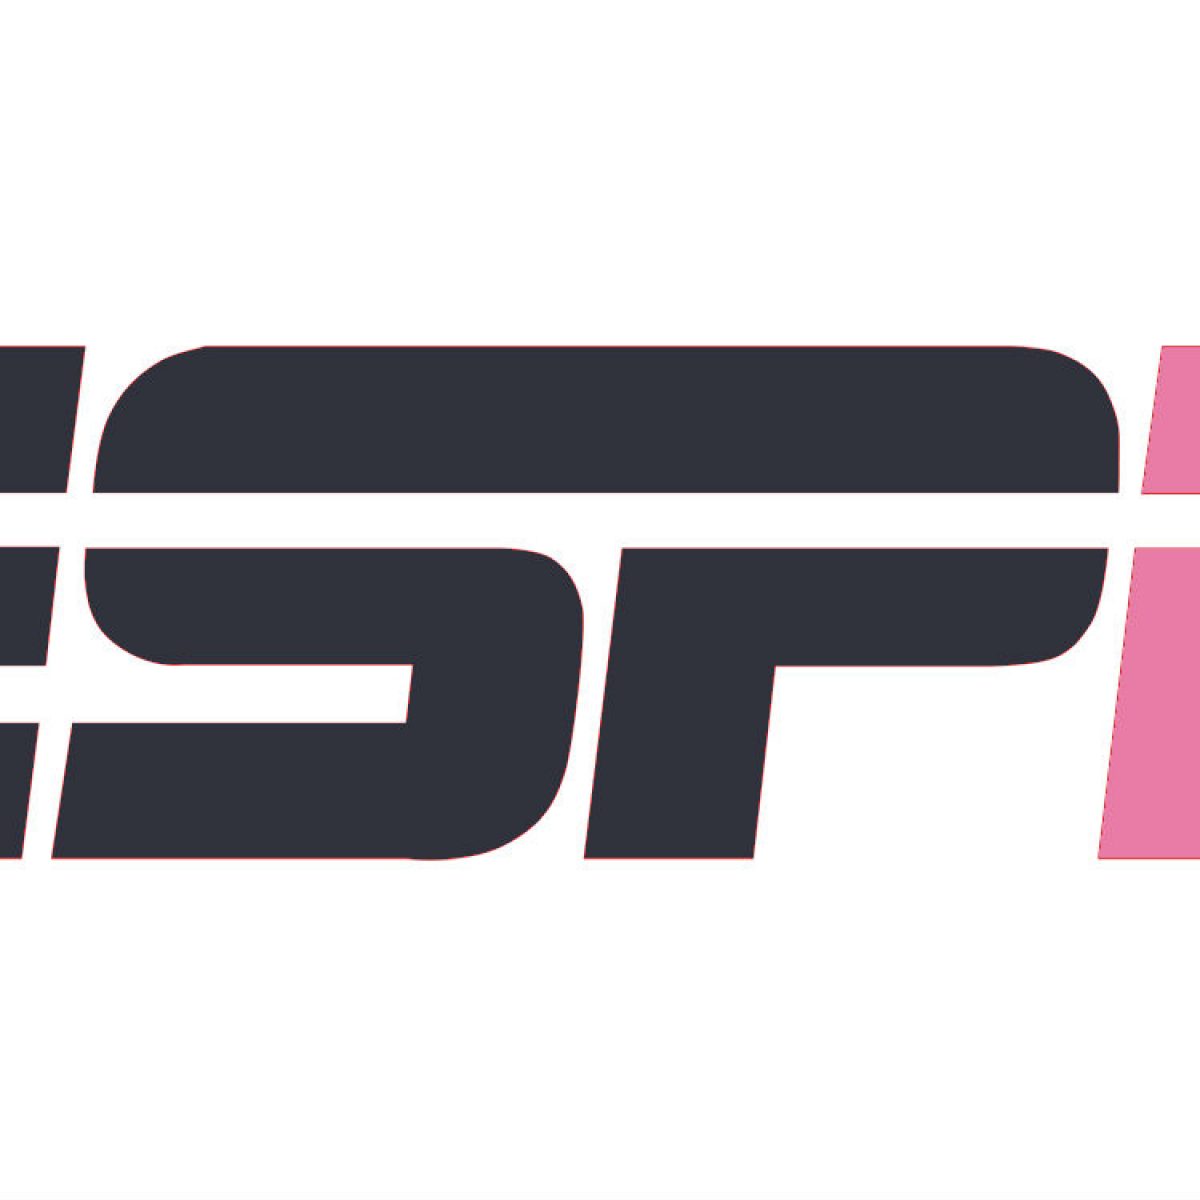 ESPN+ Service to Cost $4.99/Month, Launch This Spring